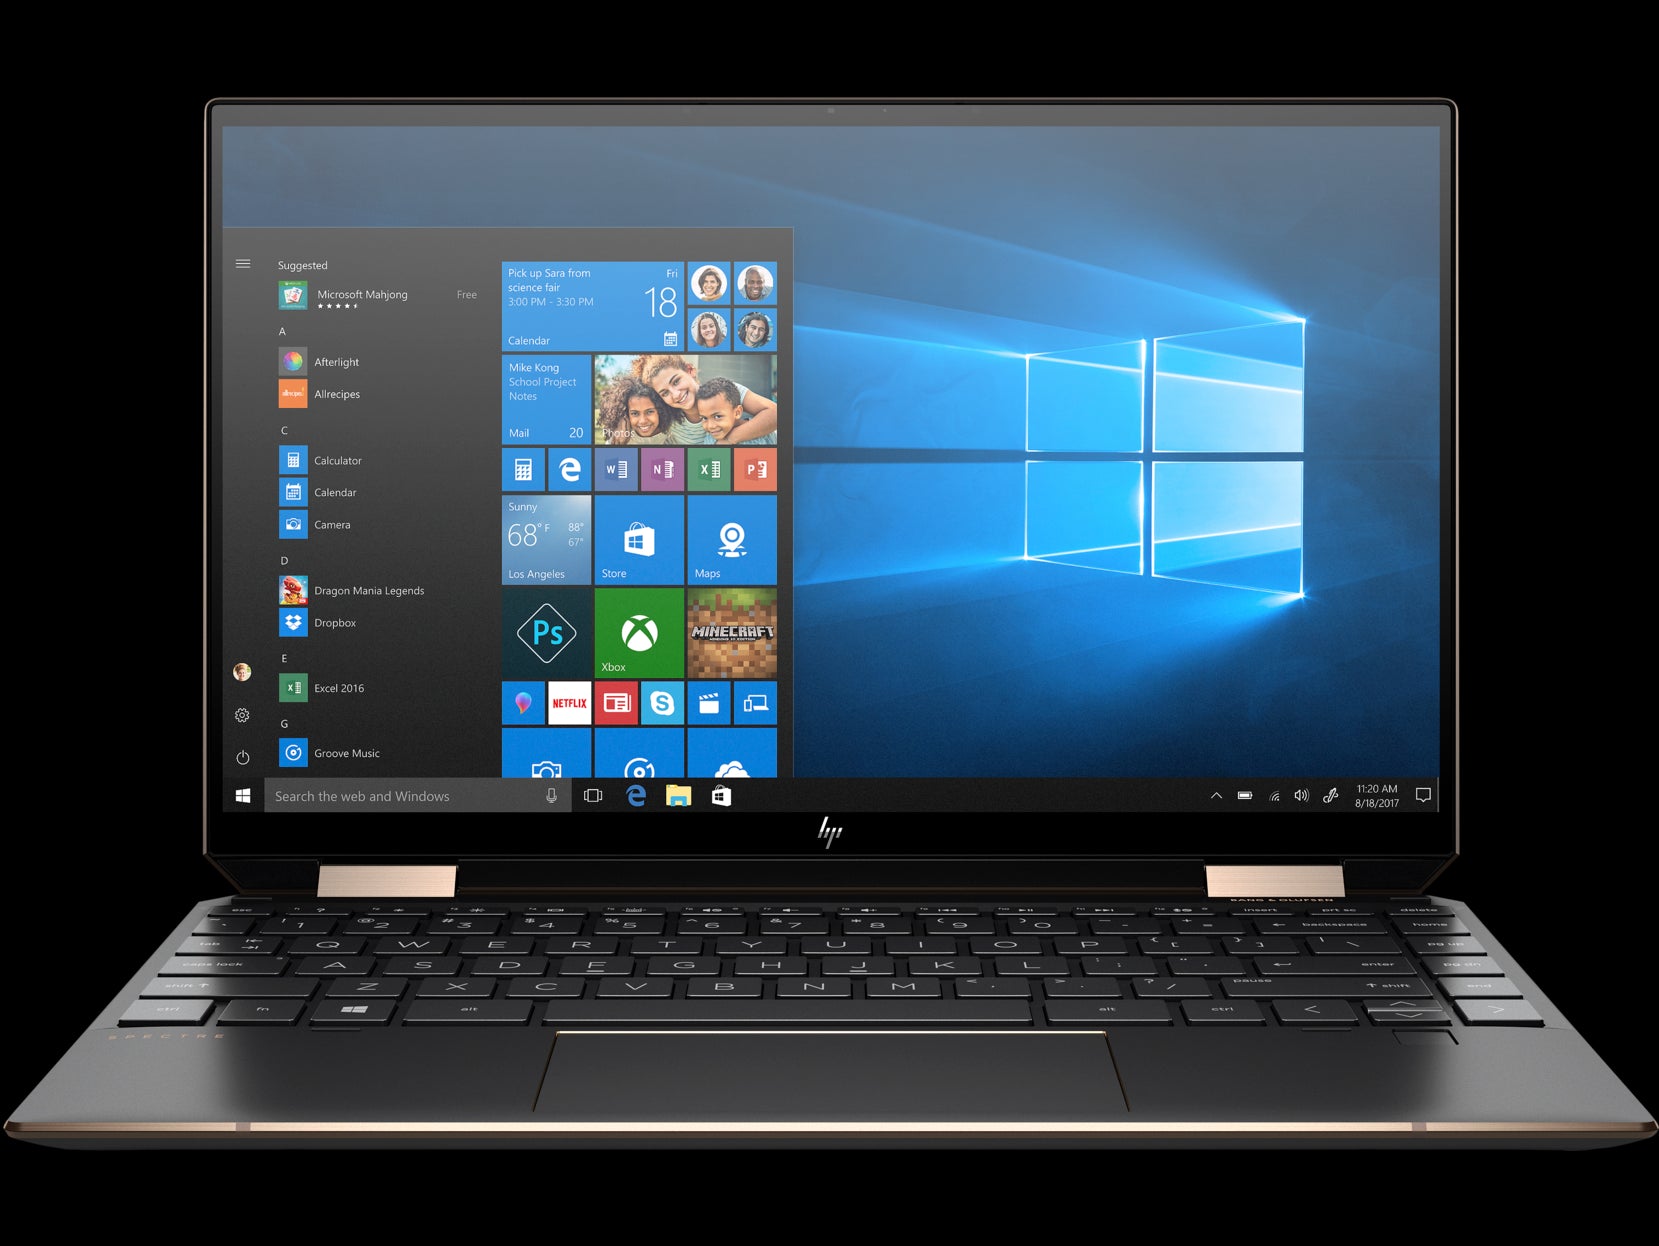 HP Spectre x360 Convertible 13-aw0109na Intel Core i7 11th Gen 16GB RAM 2TB SSD 13.3 Multitouch Inches Display